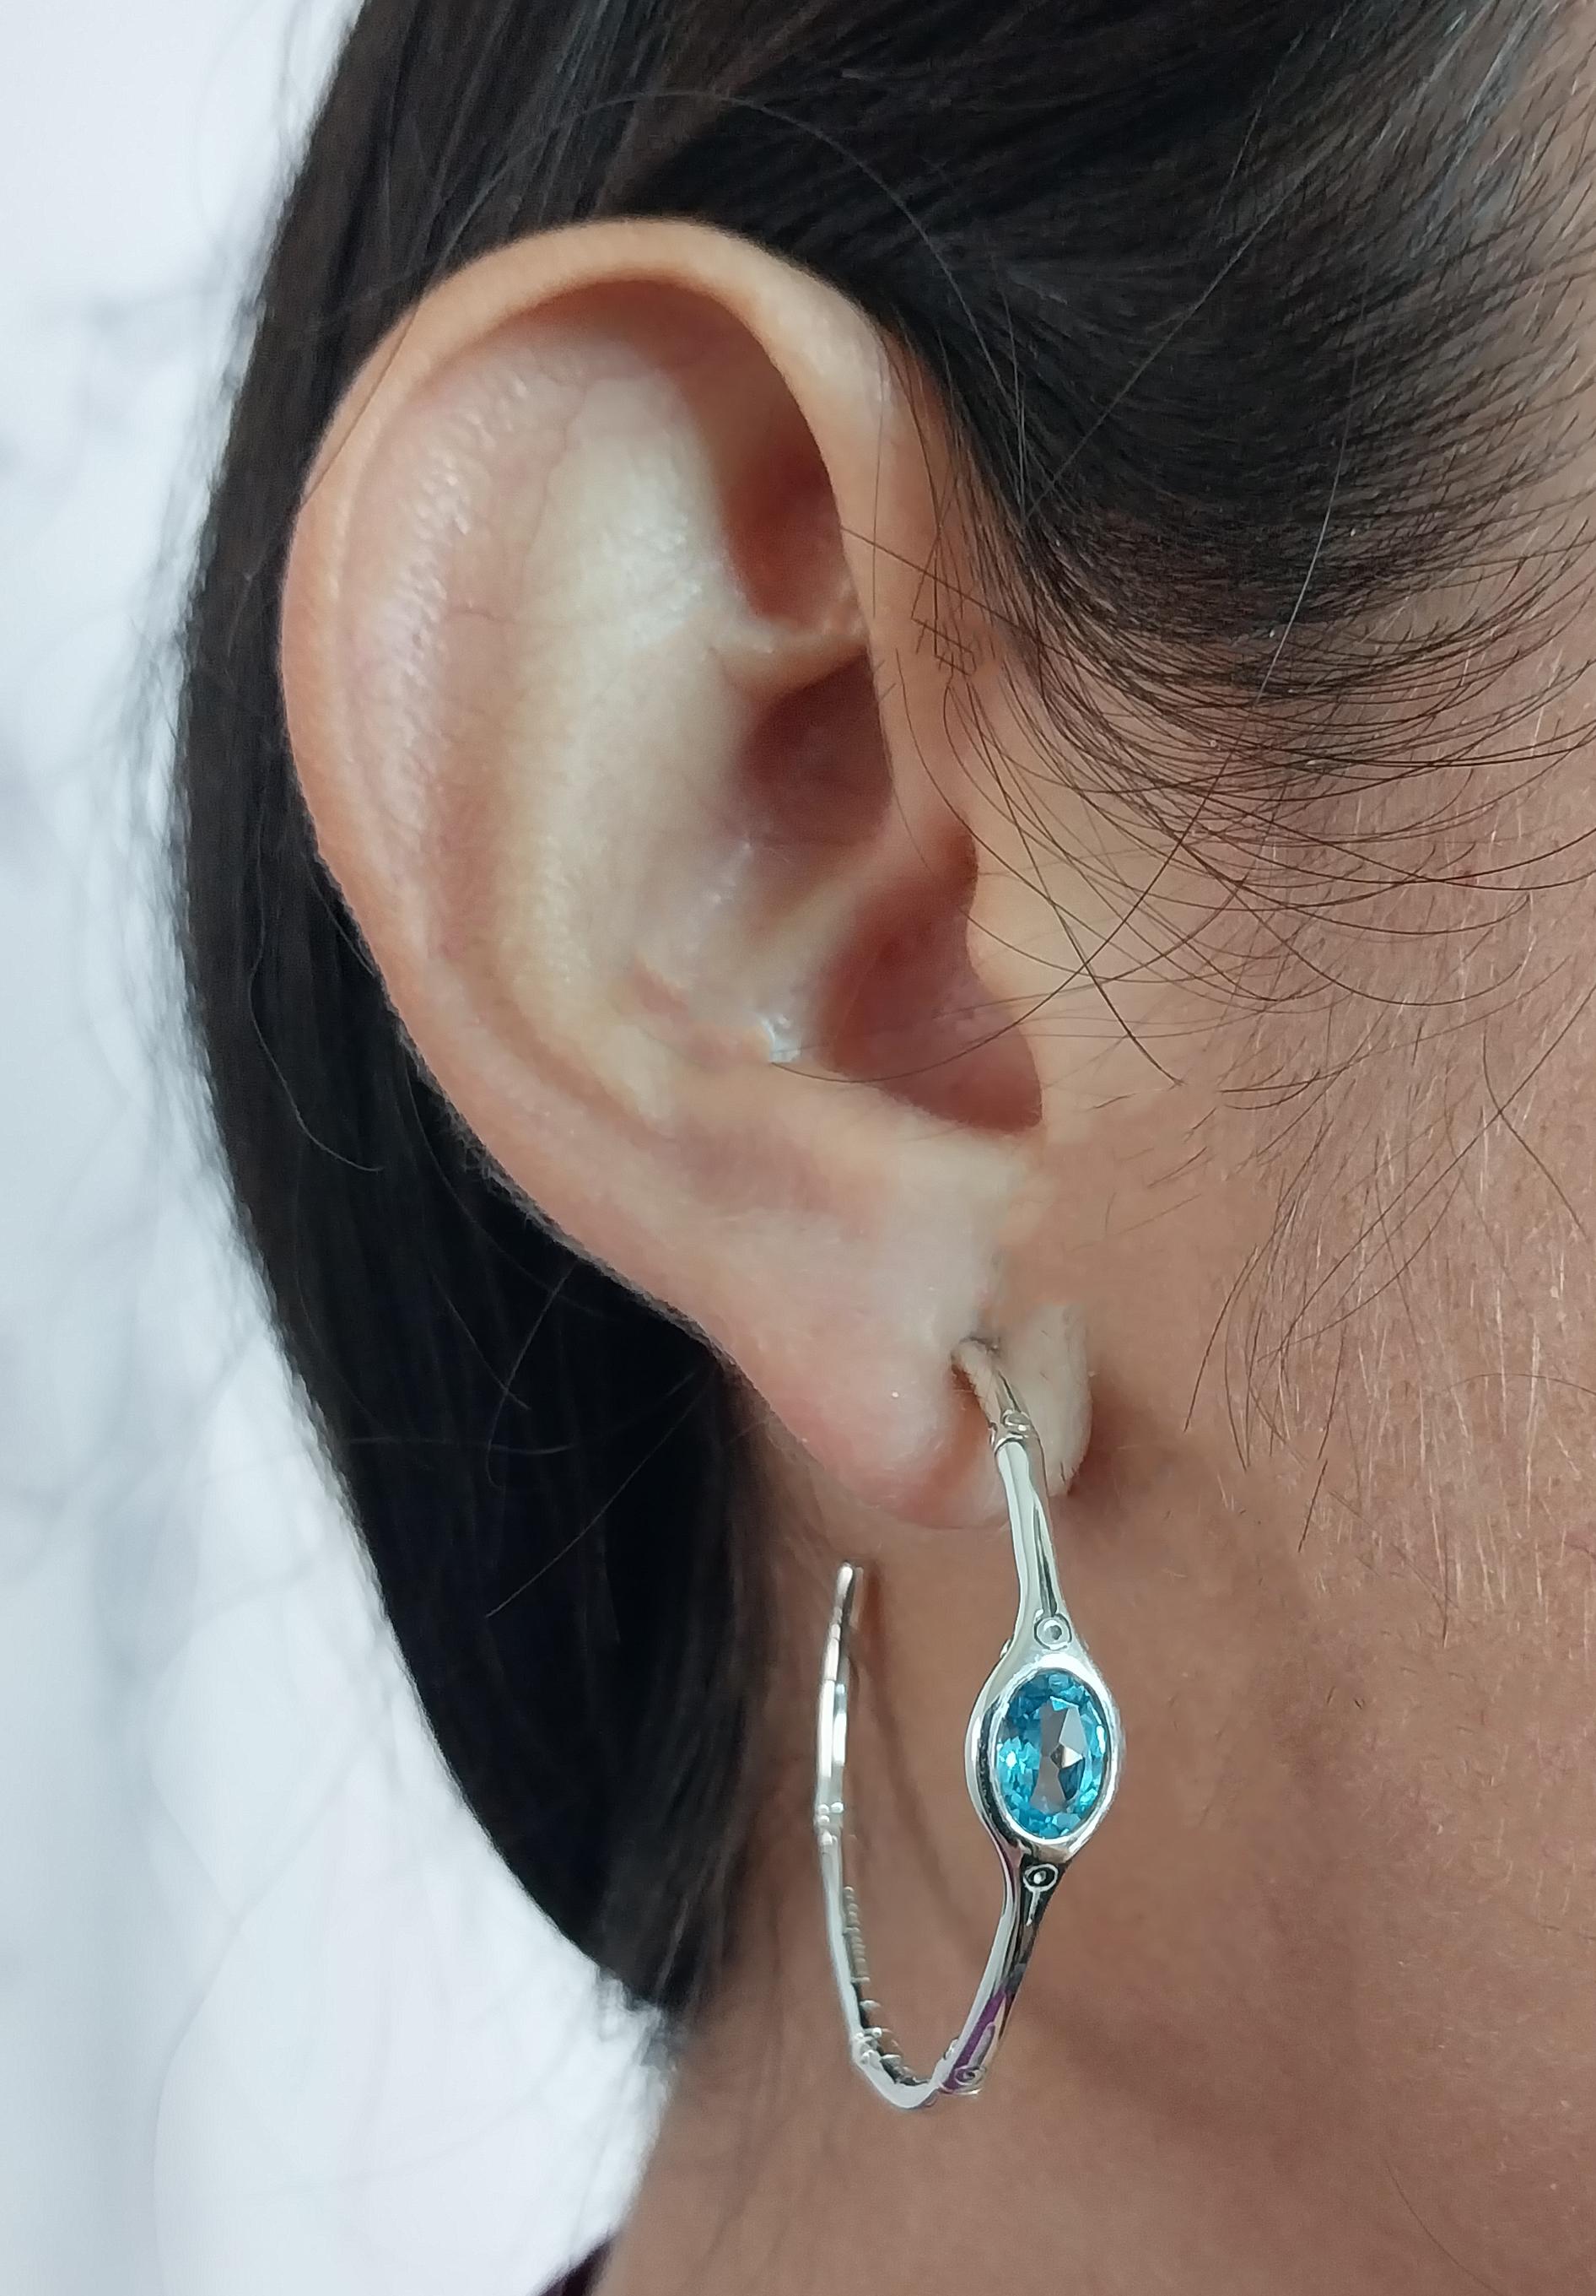 John Hardy Bamboo Hoop Earrings Crafted in Sterling Silver Featuring 2 Oval Blue Topaz. 1.5 Inch Diameter. Pierced Post with Large Friction Back. $450 MSRP.